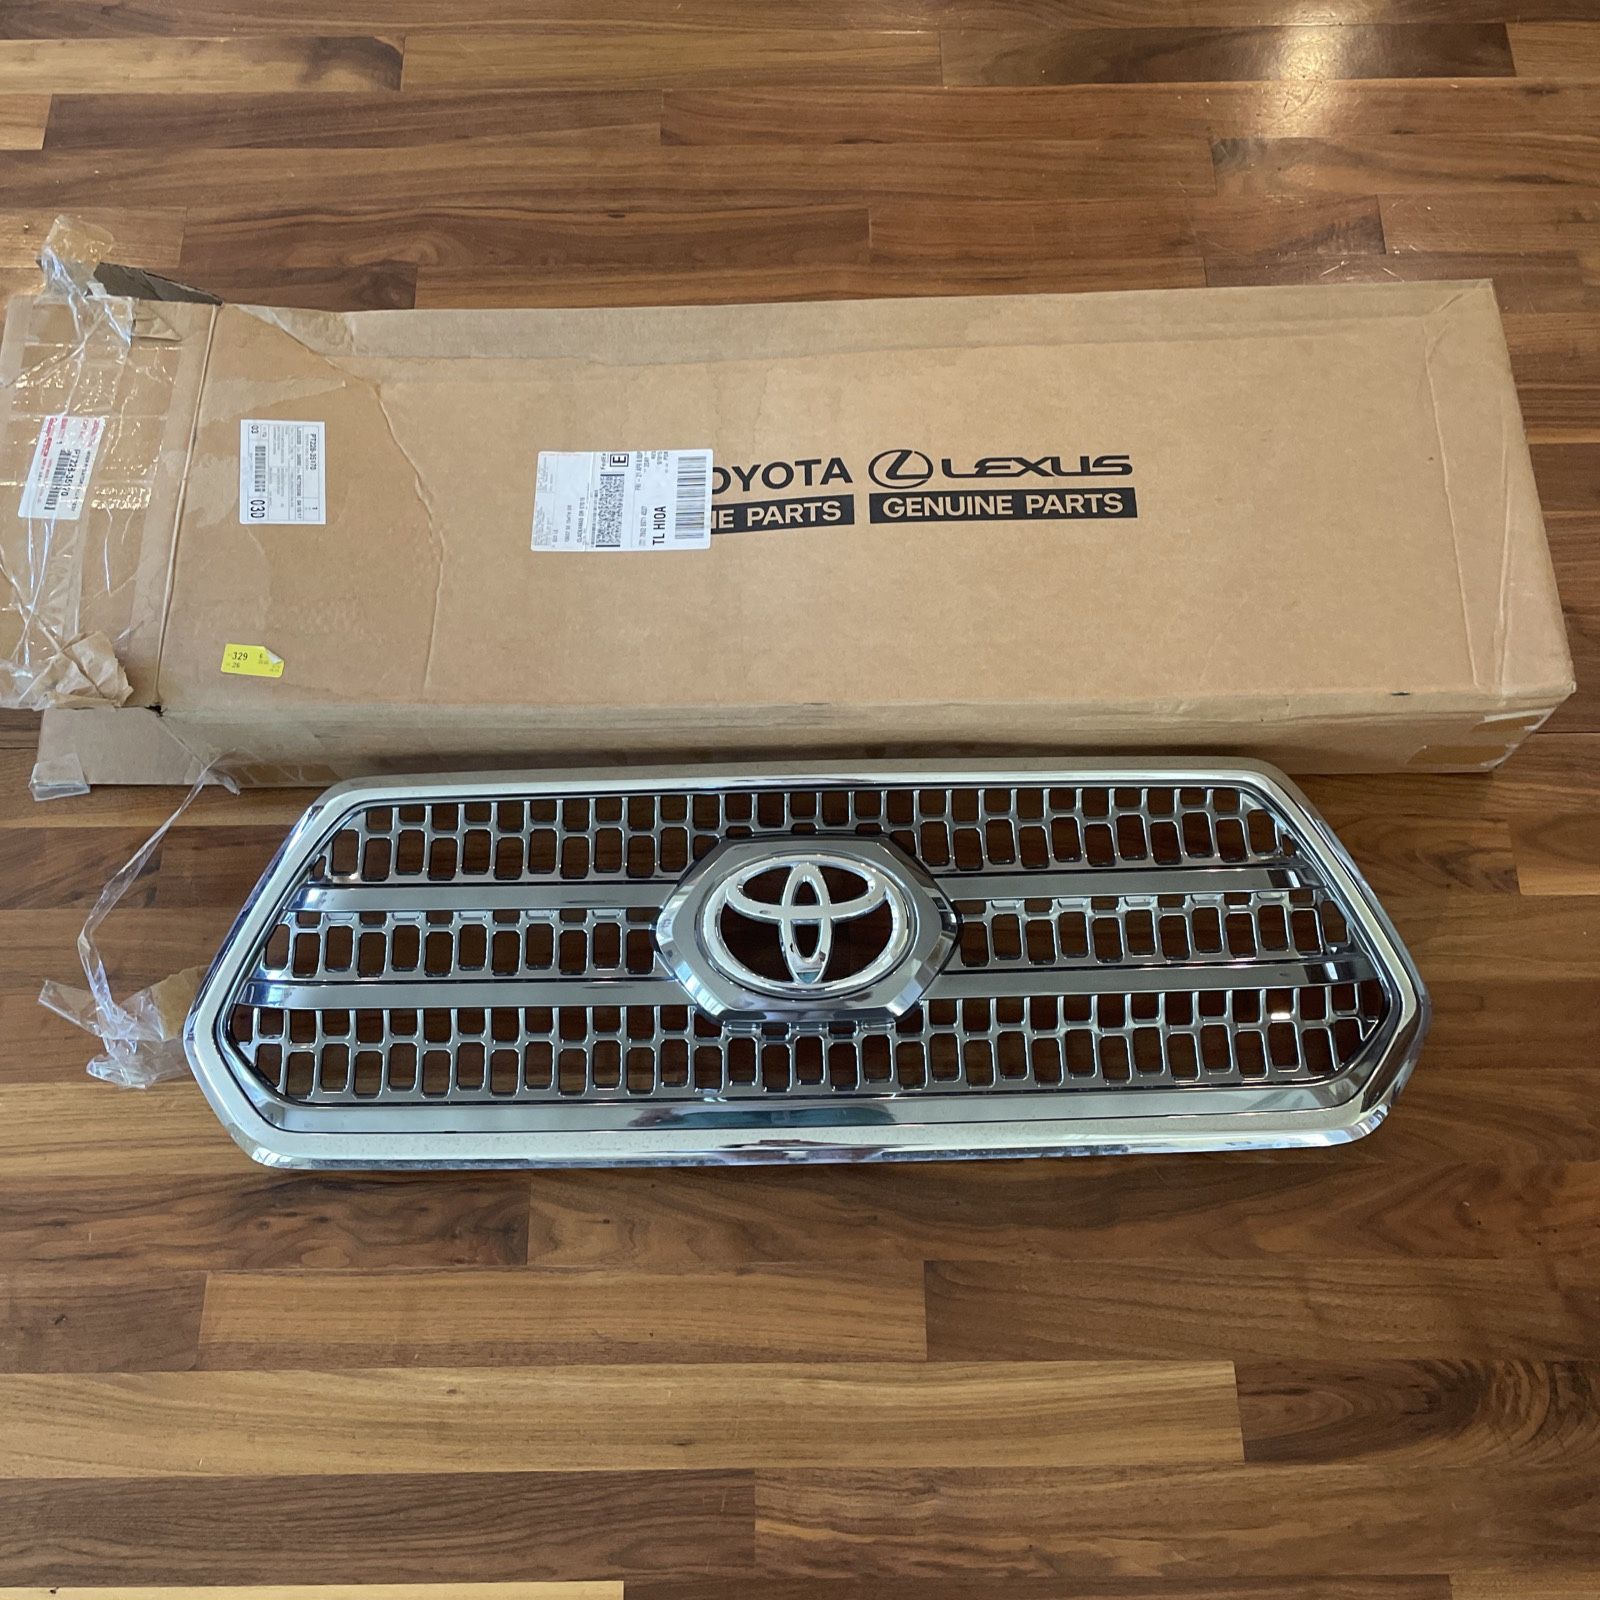 BRAND NEW 2016/17/18/19 TOYOTA TACOMA GRILLE OEM 53114 04160 With Original Box